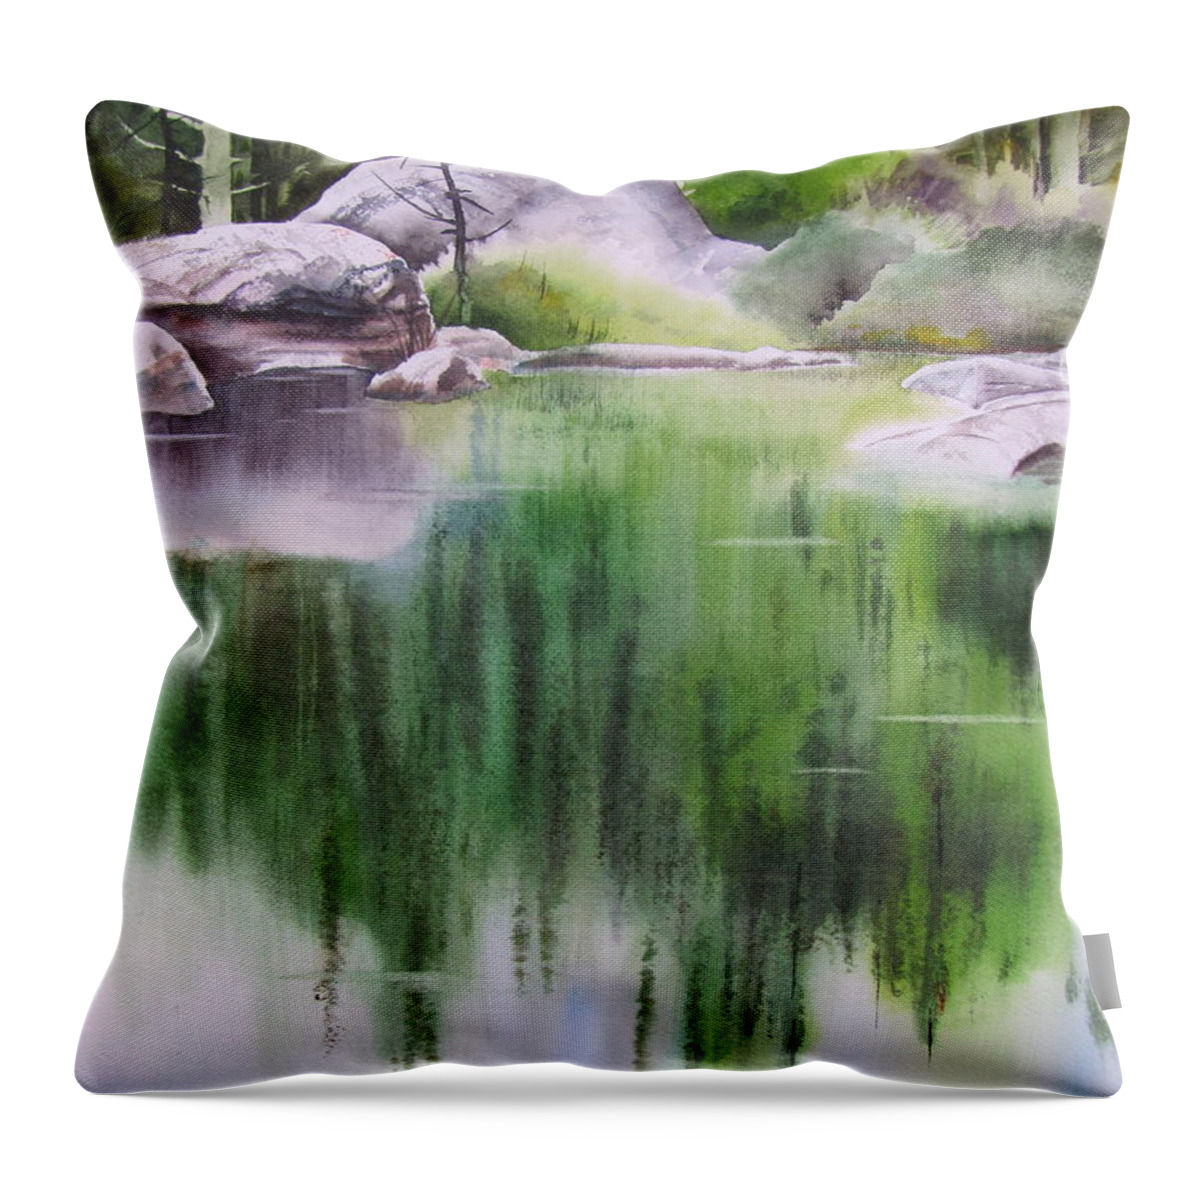 Rock Pond Throw Pillow featuring the painting Rock Pond Triptych 1 by Amanda Amend